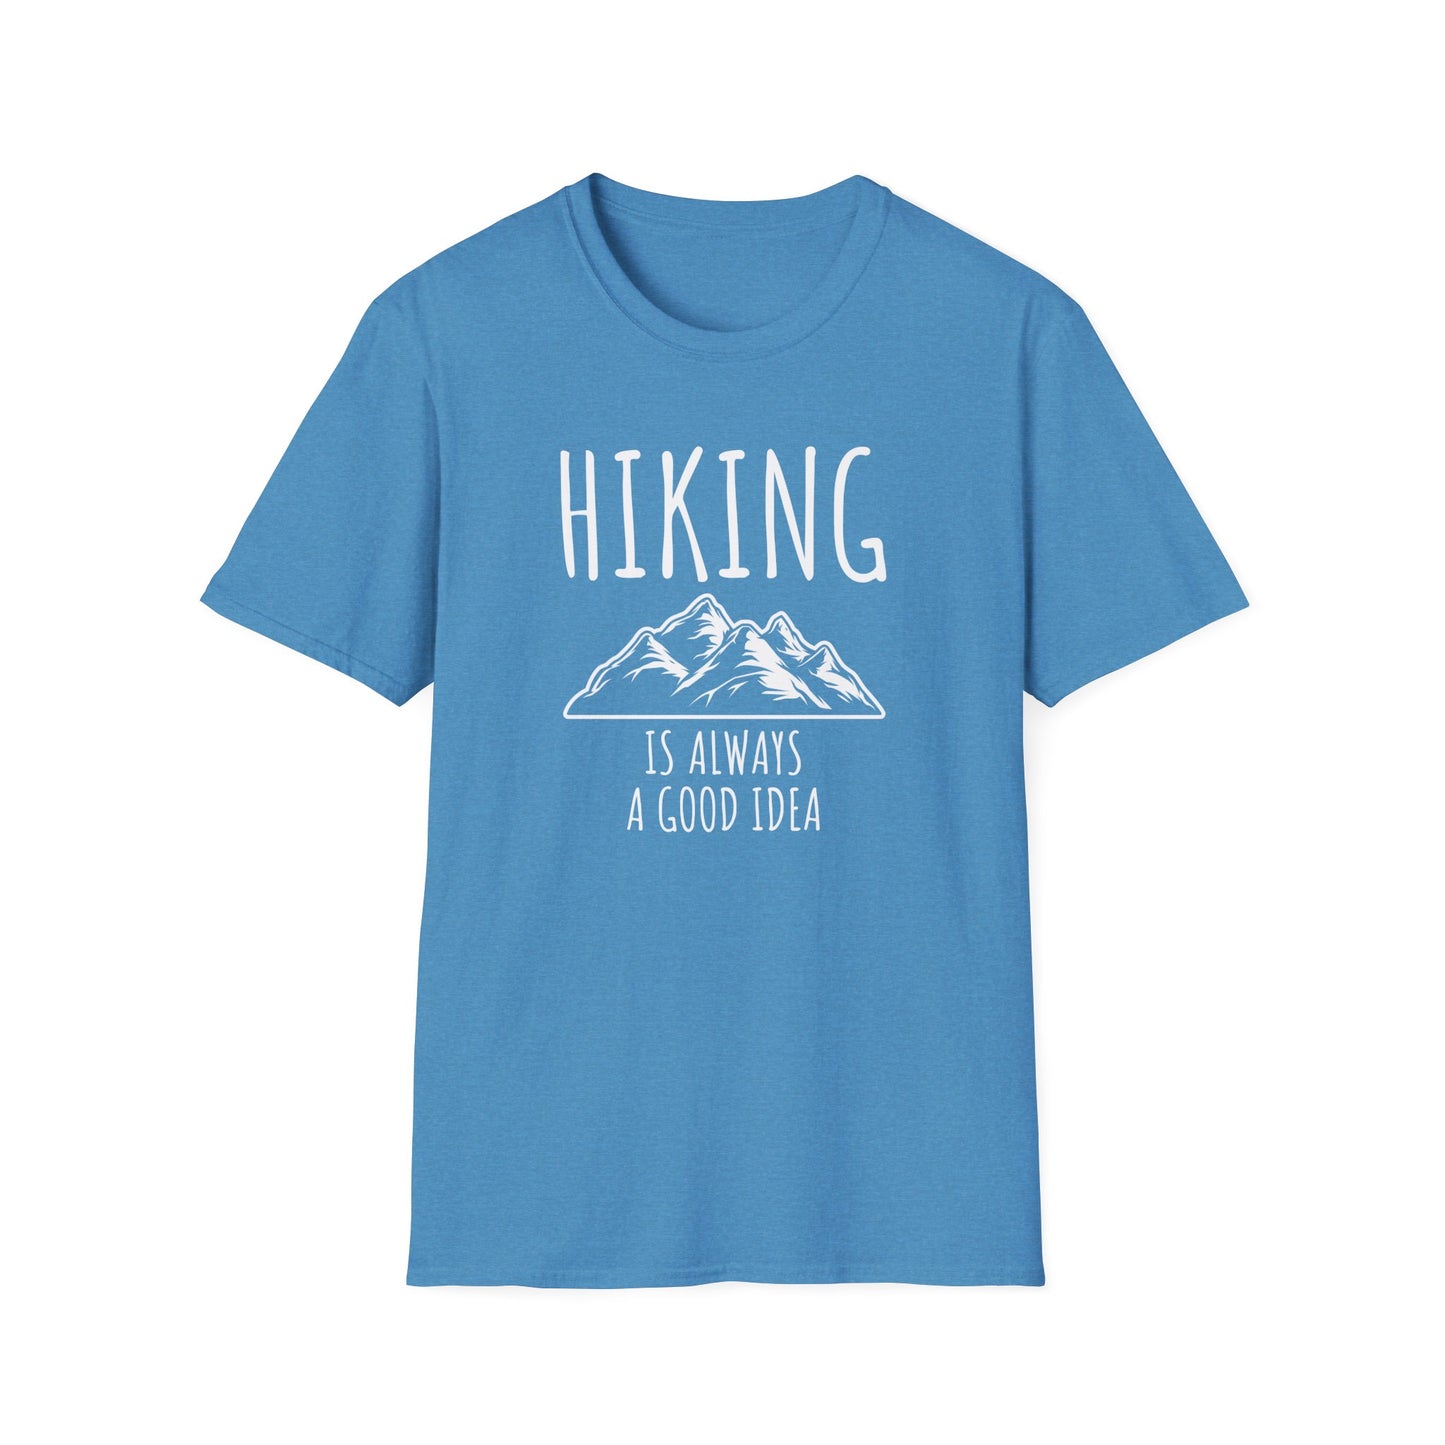 Discover Adventure in Style with Our 'Hiking is Always a Good Idea' T-Shirt